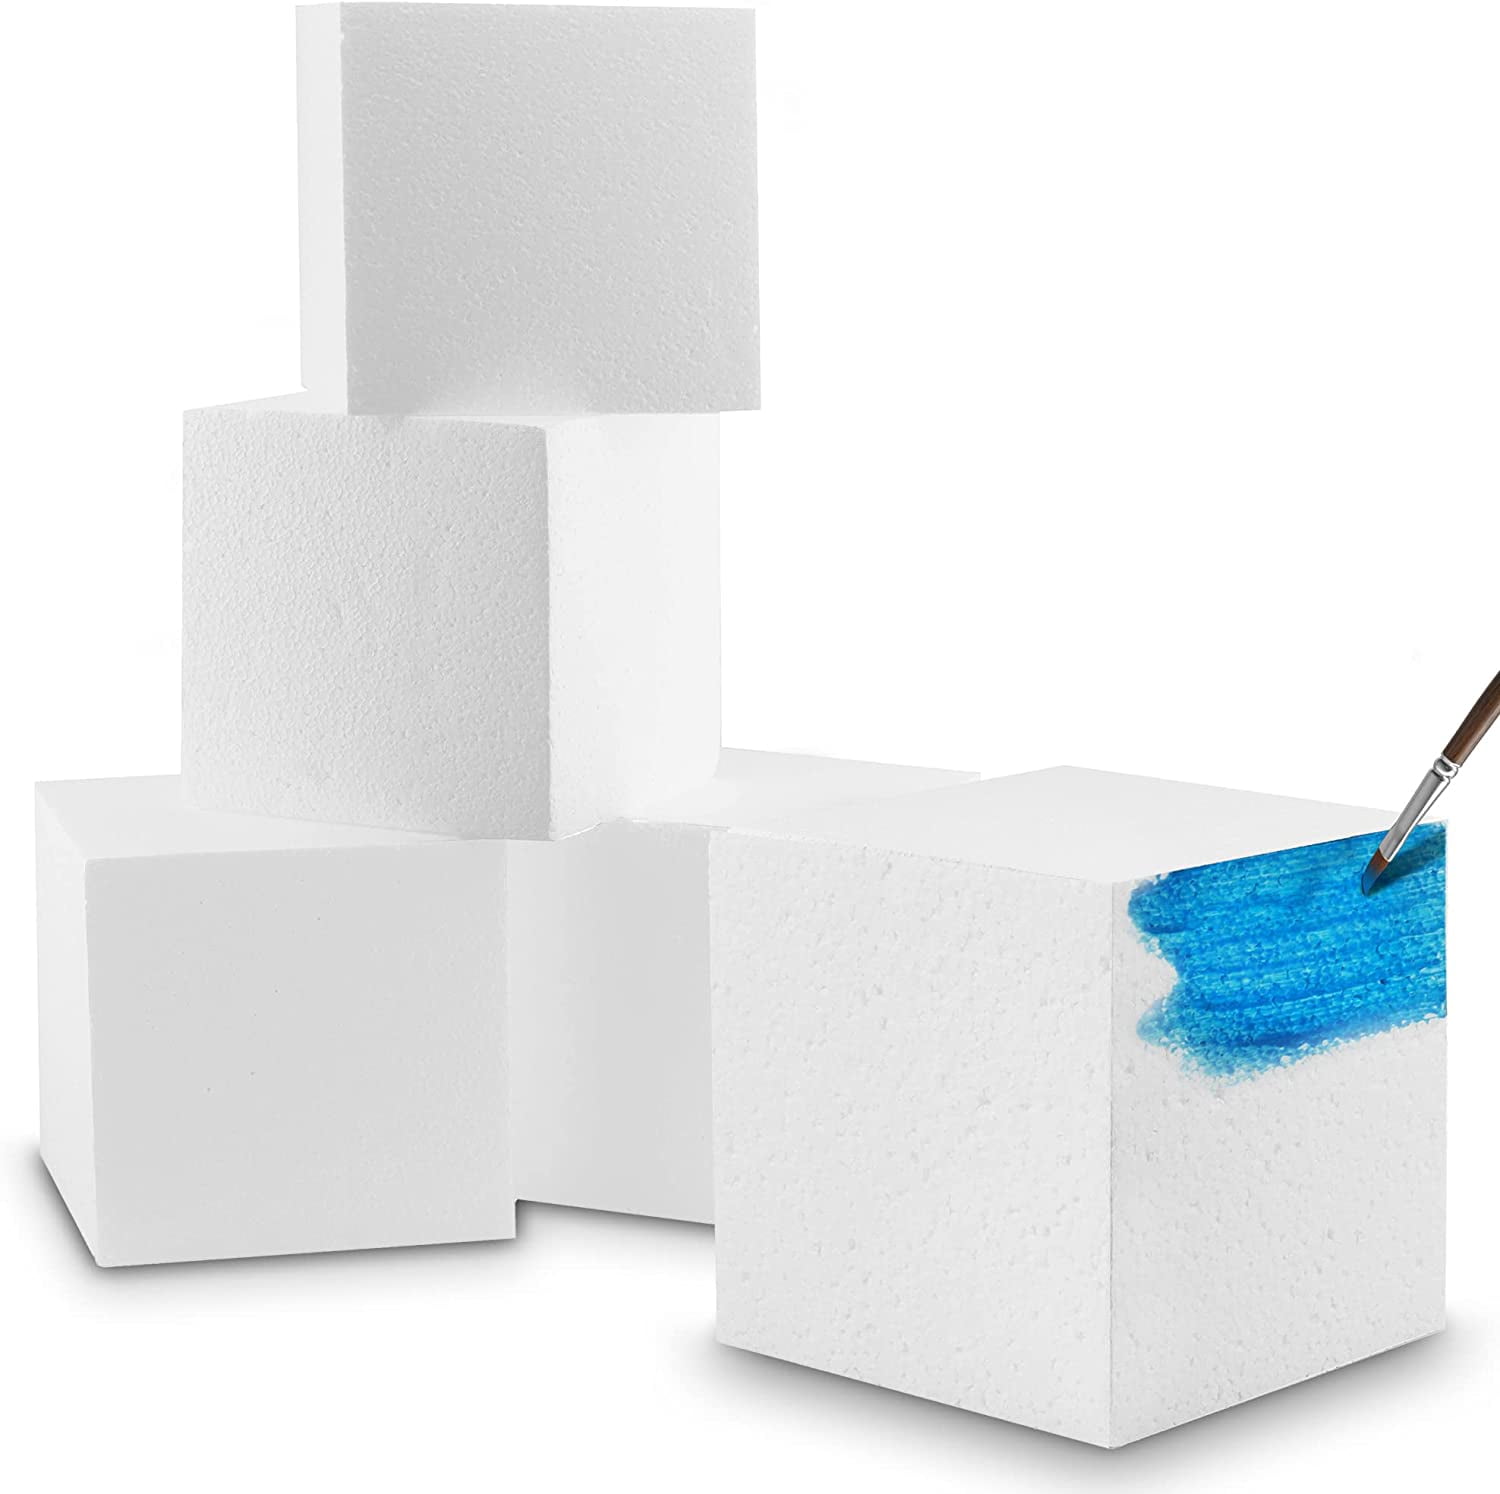 MT Products 6 x 6 x 6 White Polystyrene Foam Blocks - Pack of 4